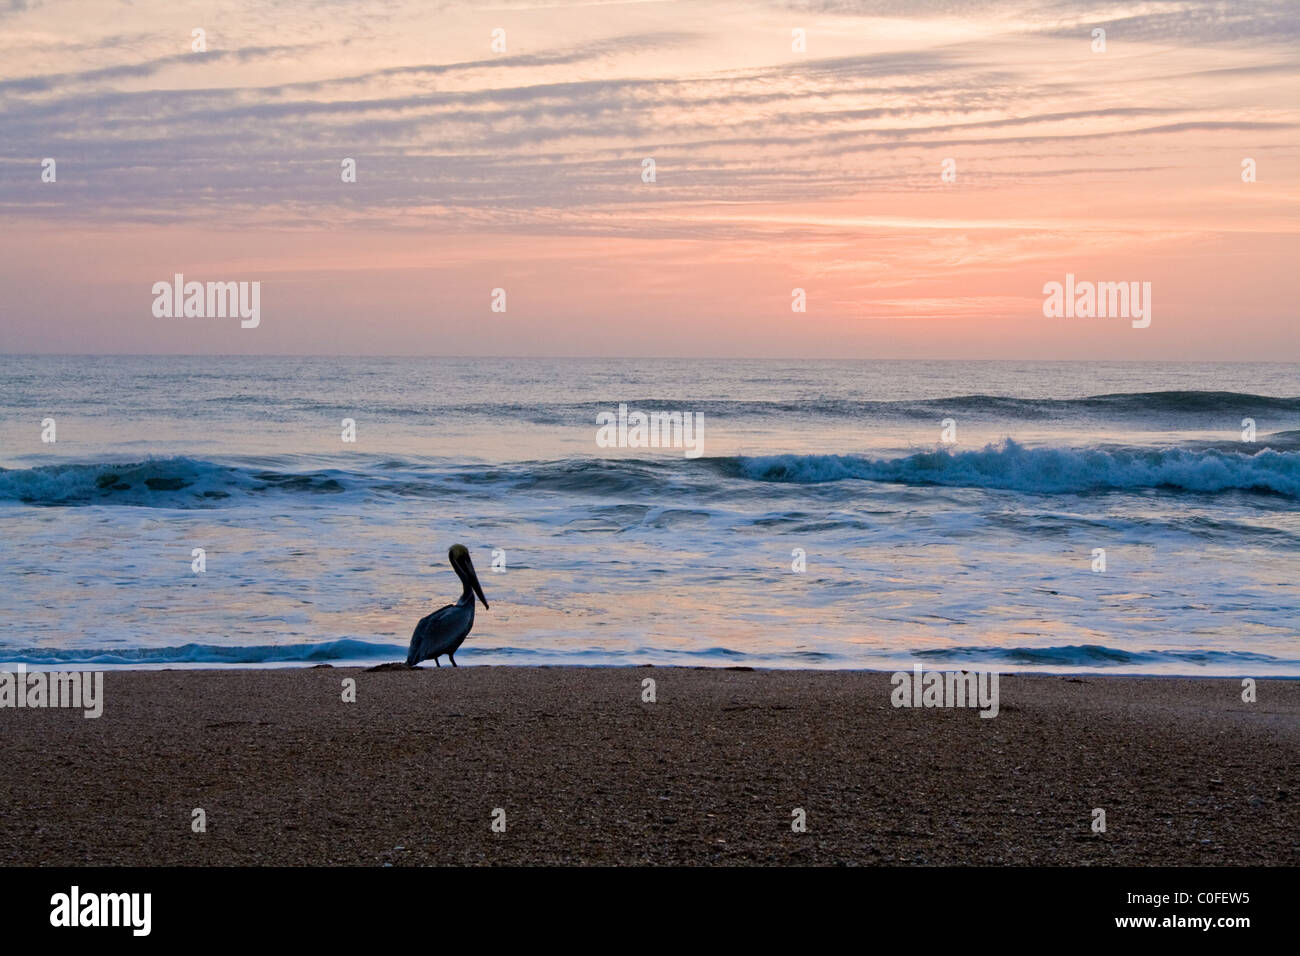 Single lone pelican at the beach at sunrise waiting for the day. Stock Photo